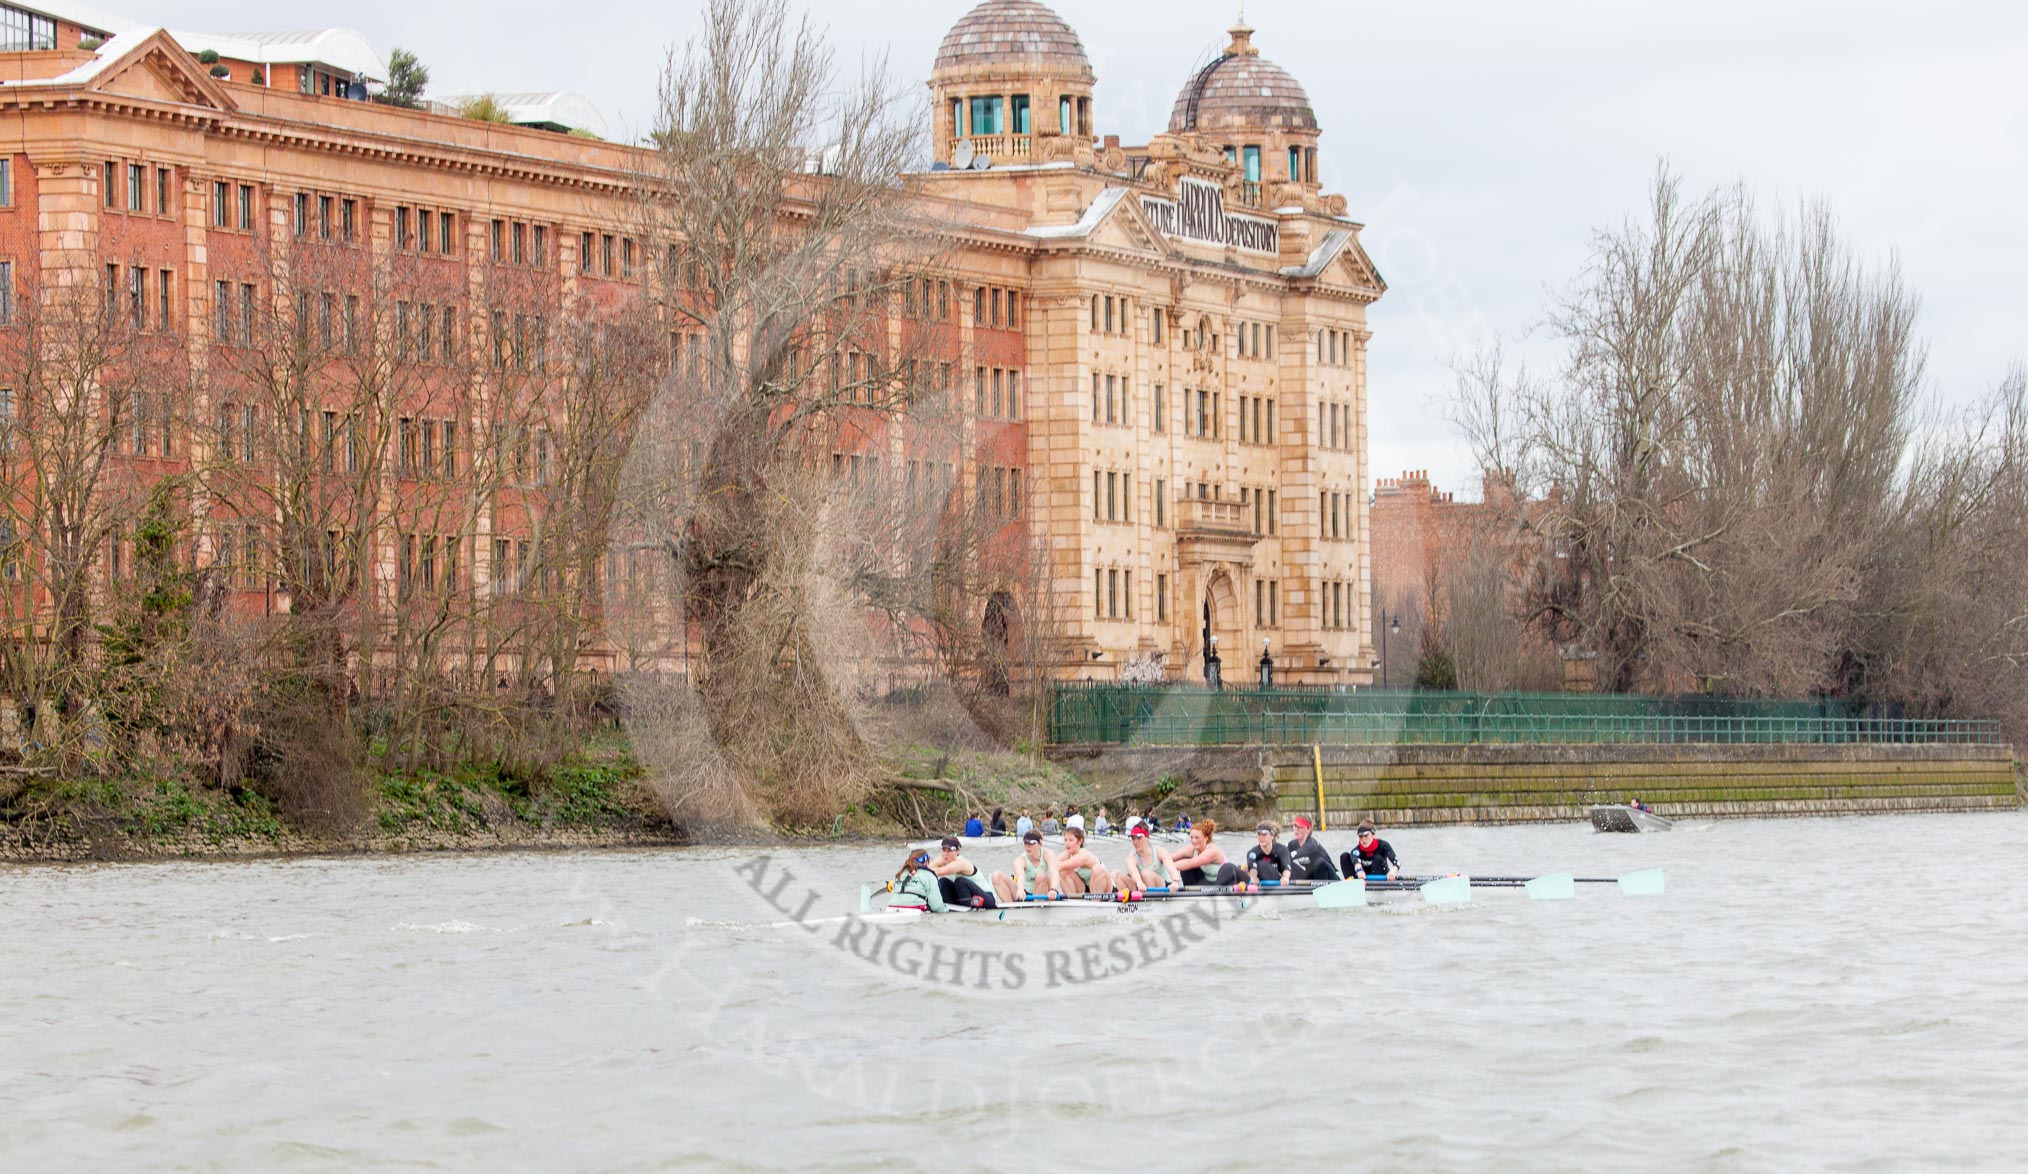 The Boat Race season 2014 - fixture CUWBC vs Thames RC: The Cambridge boat, in the lead over Thames RC, passing the Harrods Depository..




on 02 March 2014 at 13:16, image #112